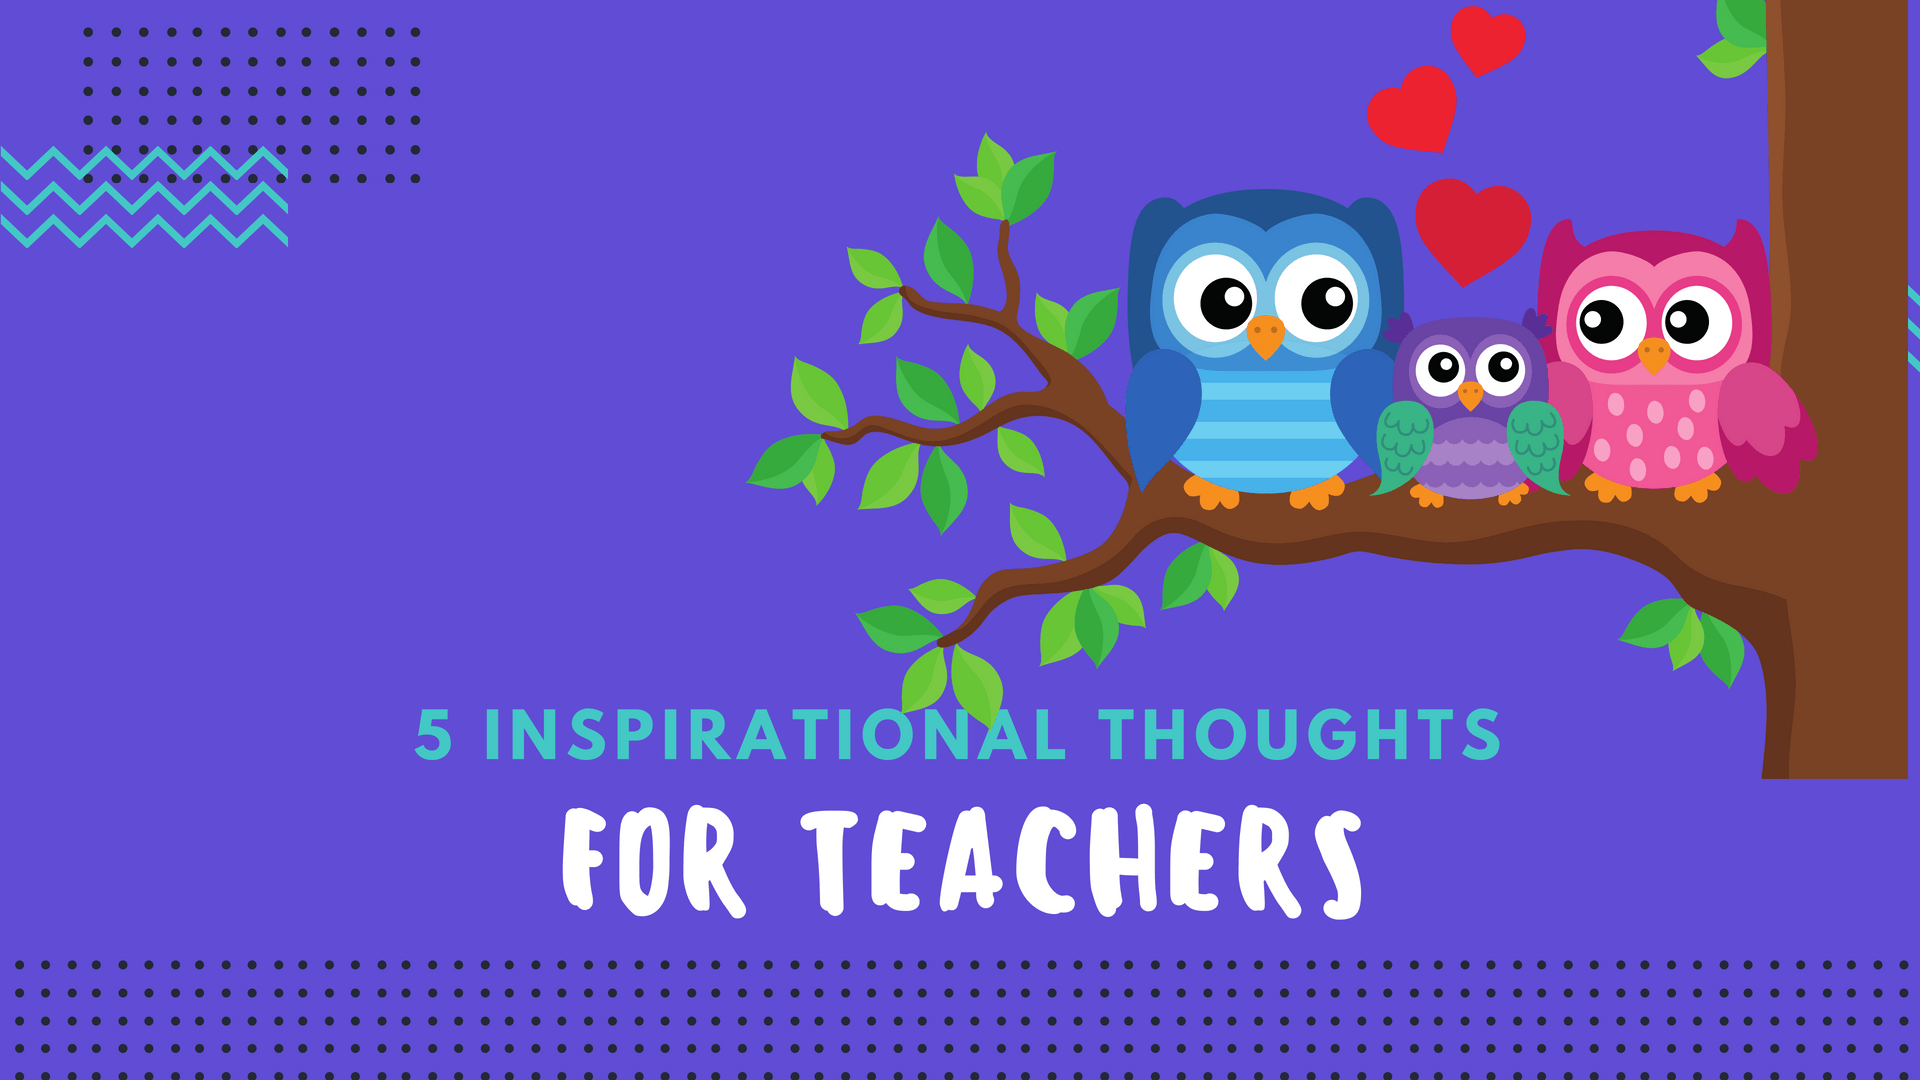 Inspirational Thoughts For Teachers - Thoughts On Teachers - HD Wallpaper 